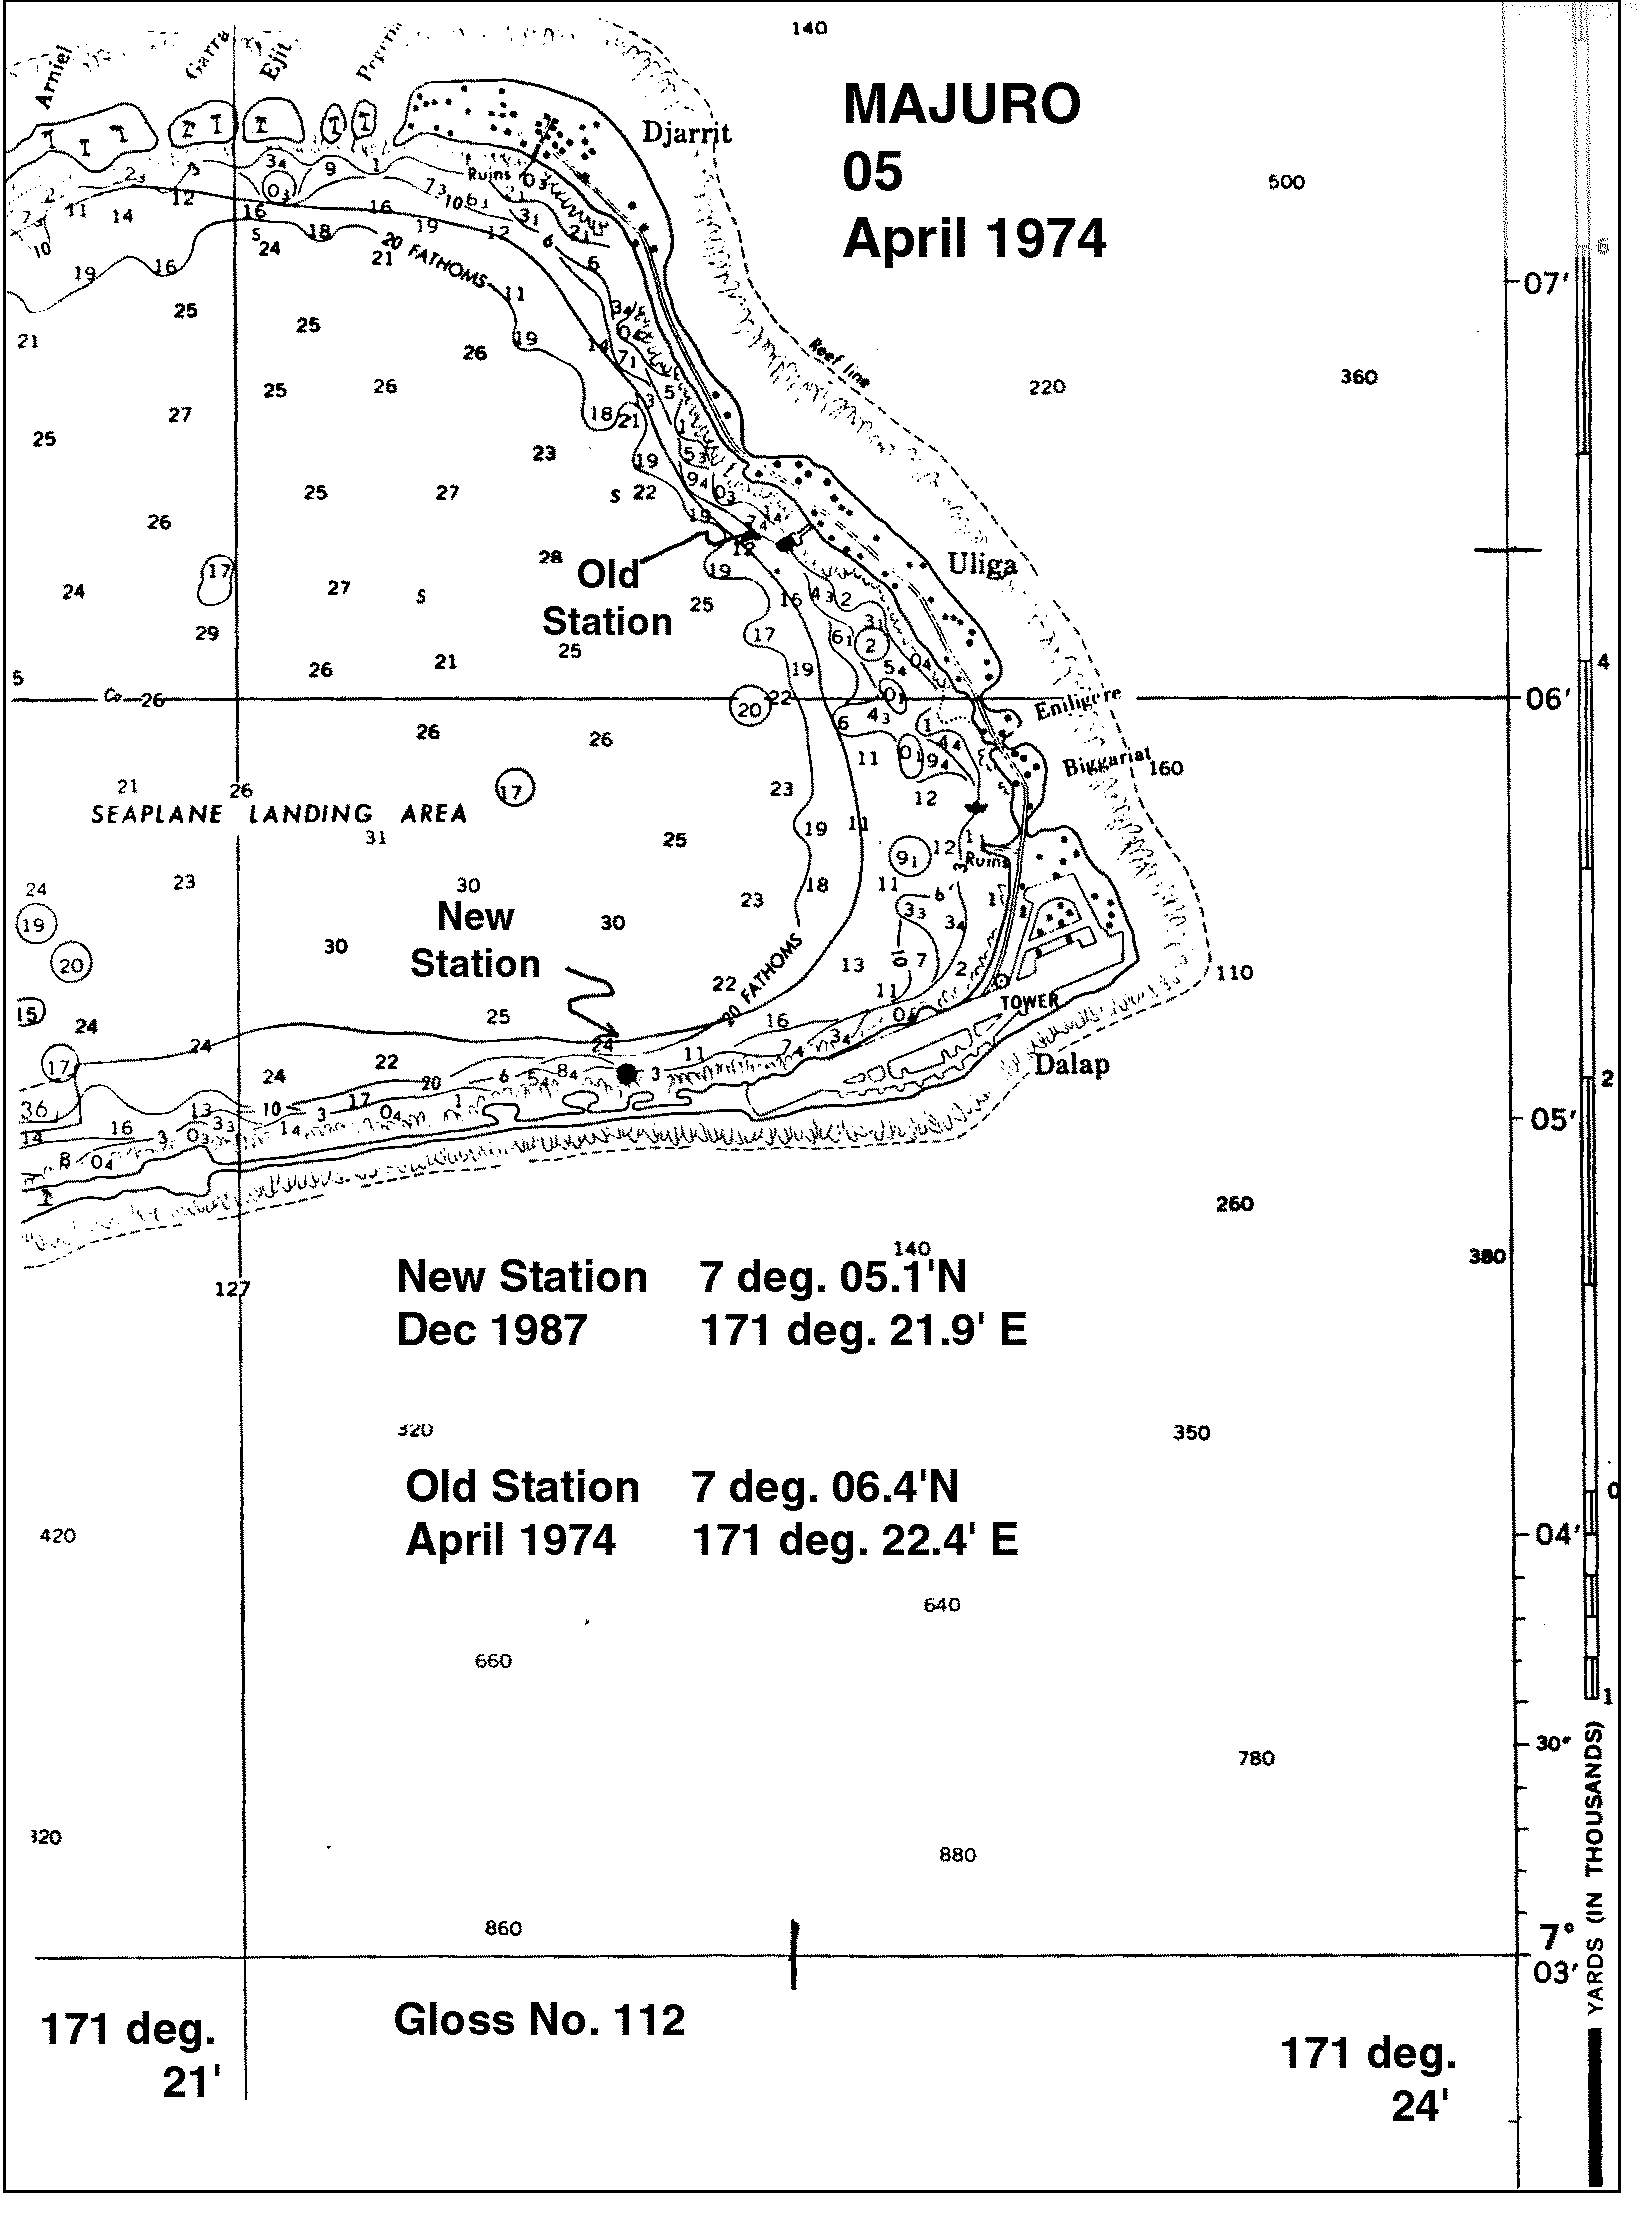 Location map for Majuro, Marshall Is.